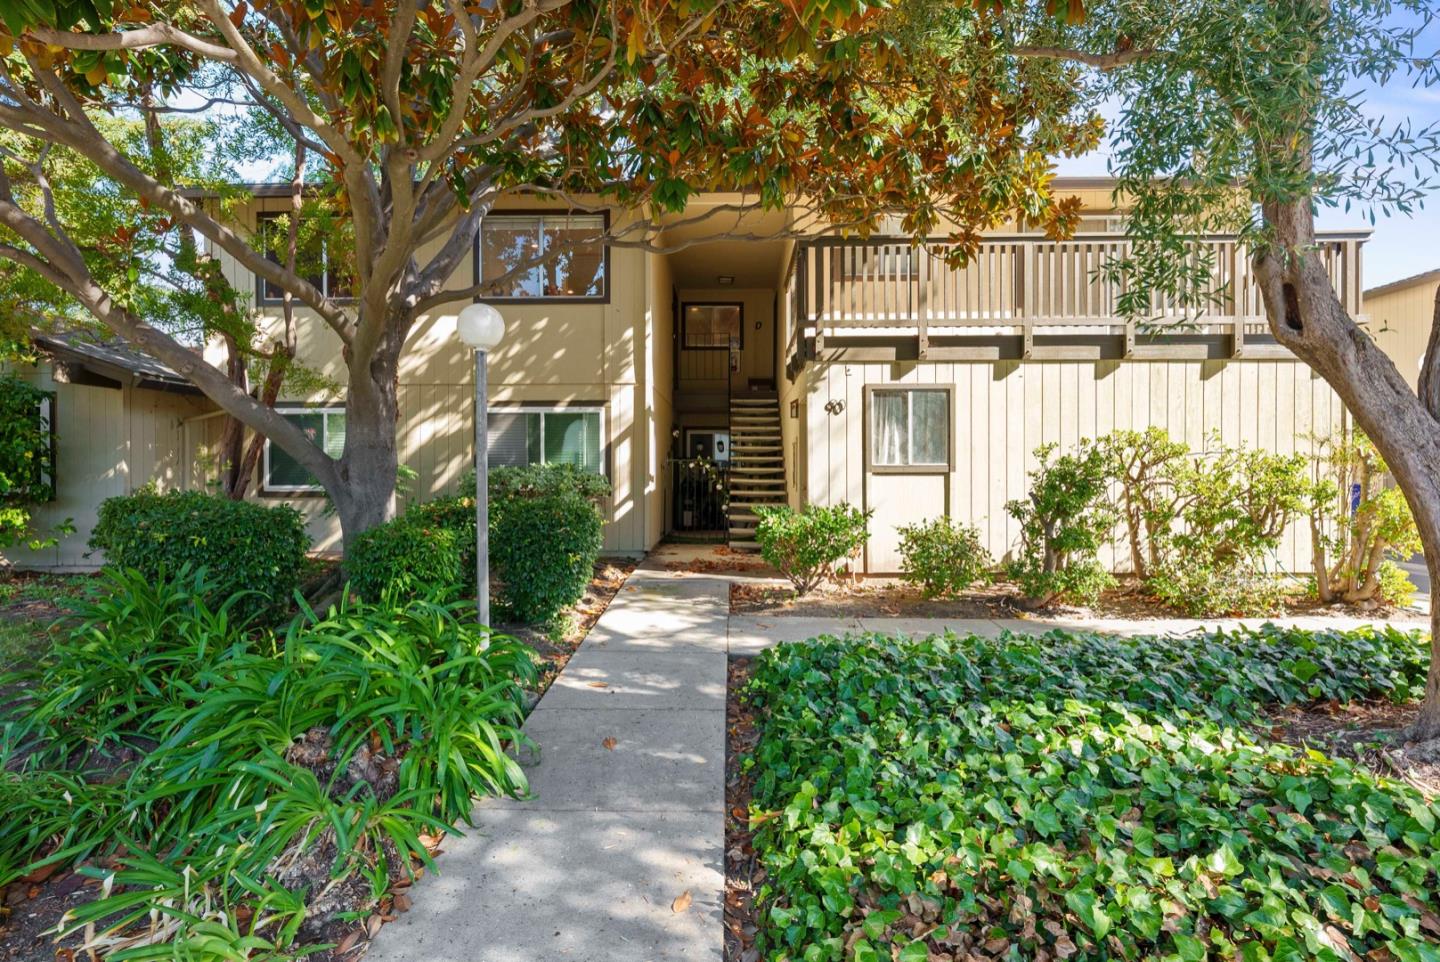 90 Flynn AVE C, MOUNTAIN VIEW, CA 94043